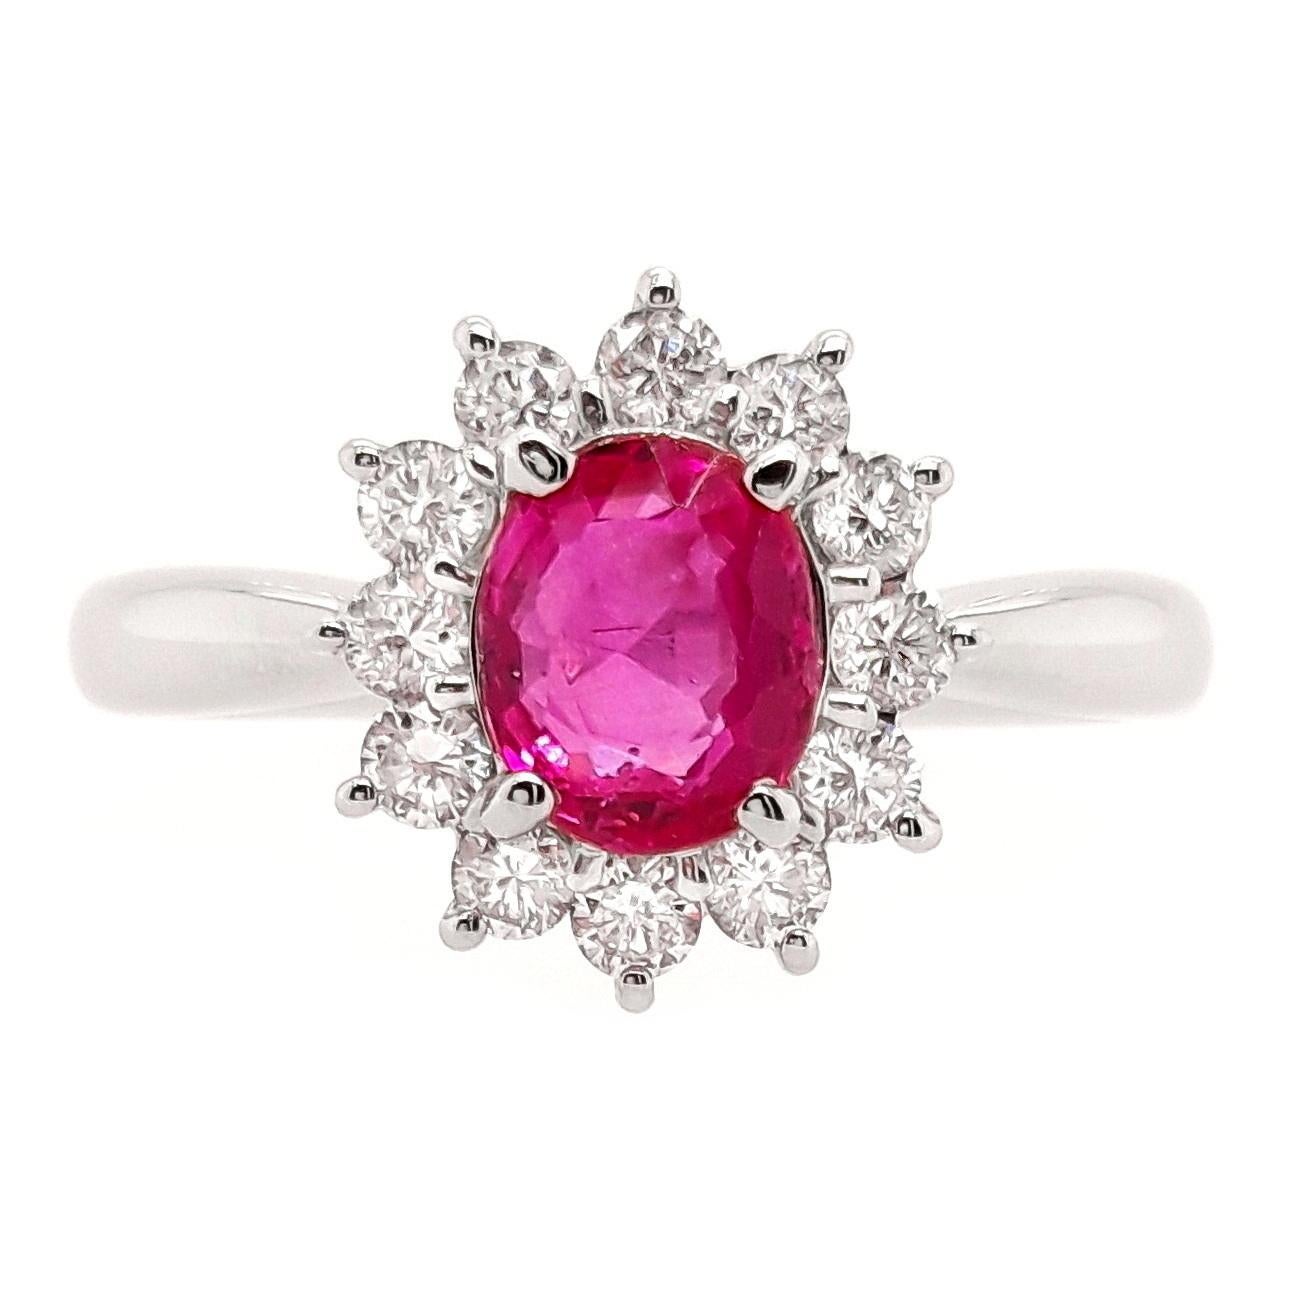 Add a touch of timeless charm to your collection with Top Crown Jewelry House collection, this 1.09 carats un-treated ruby platinum ring. The intense purplish-pink-red hue is beautifully complemented by shining diamonds, creating a captivating piece